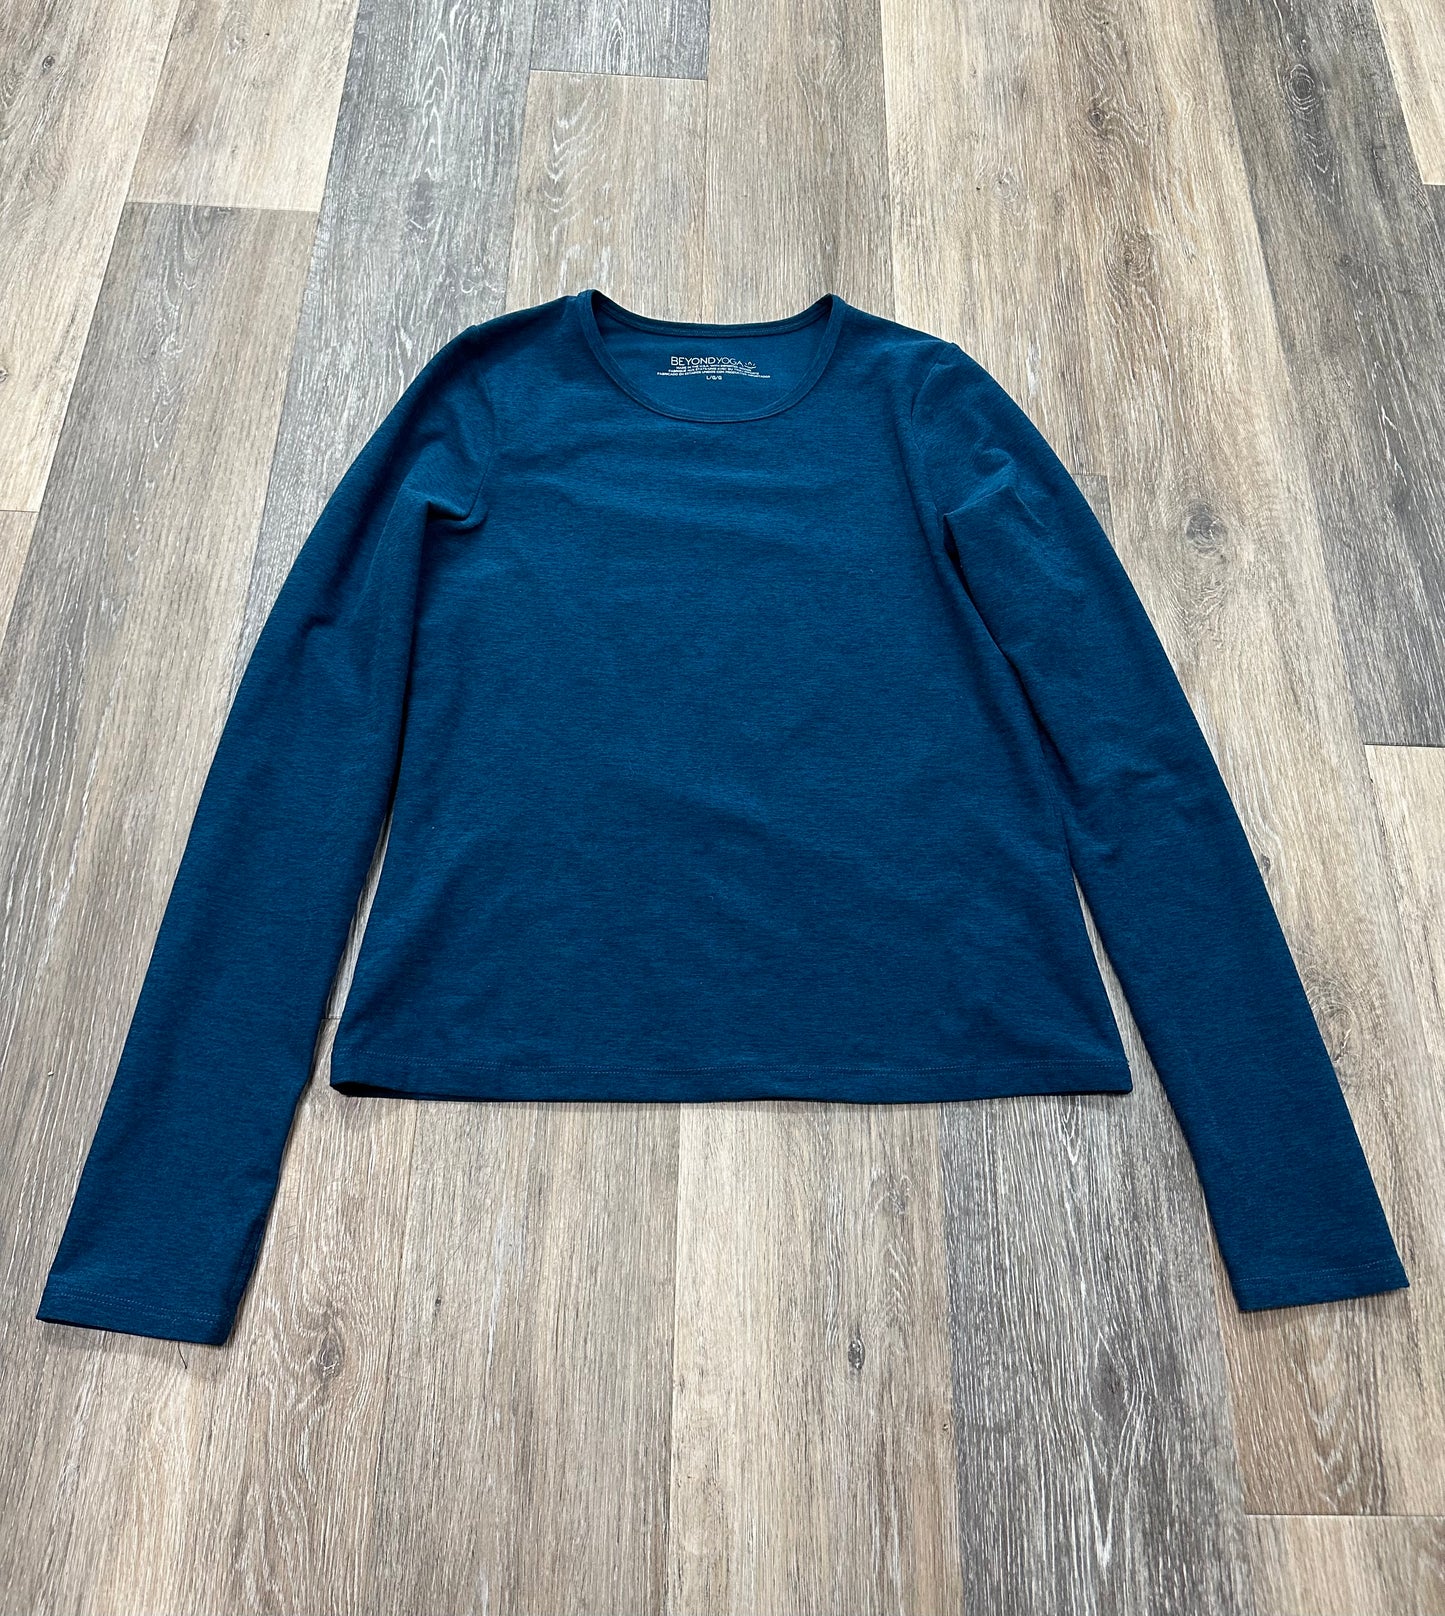 Athletic Top Long Sleeve Crewneck By Beyond Yoga  Size: L